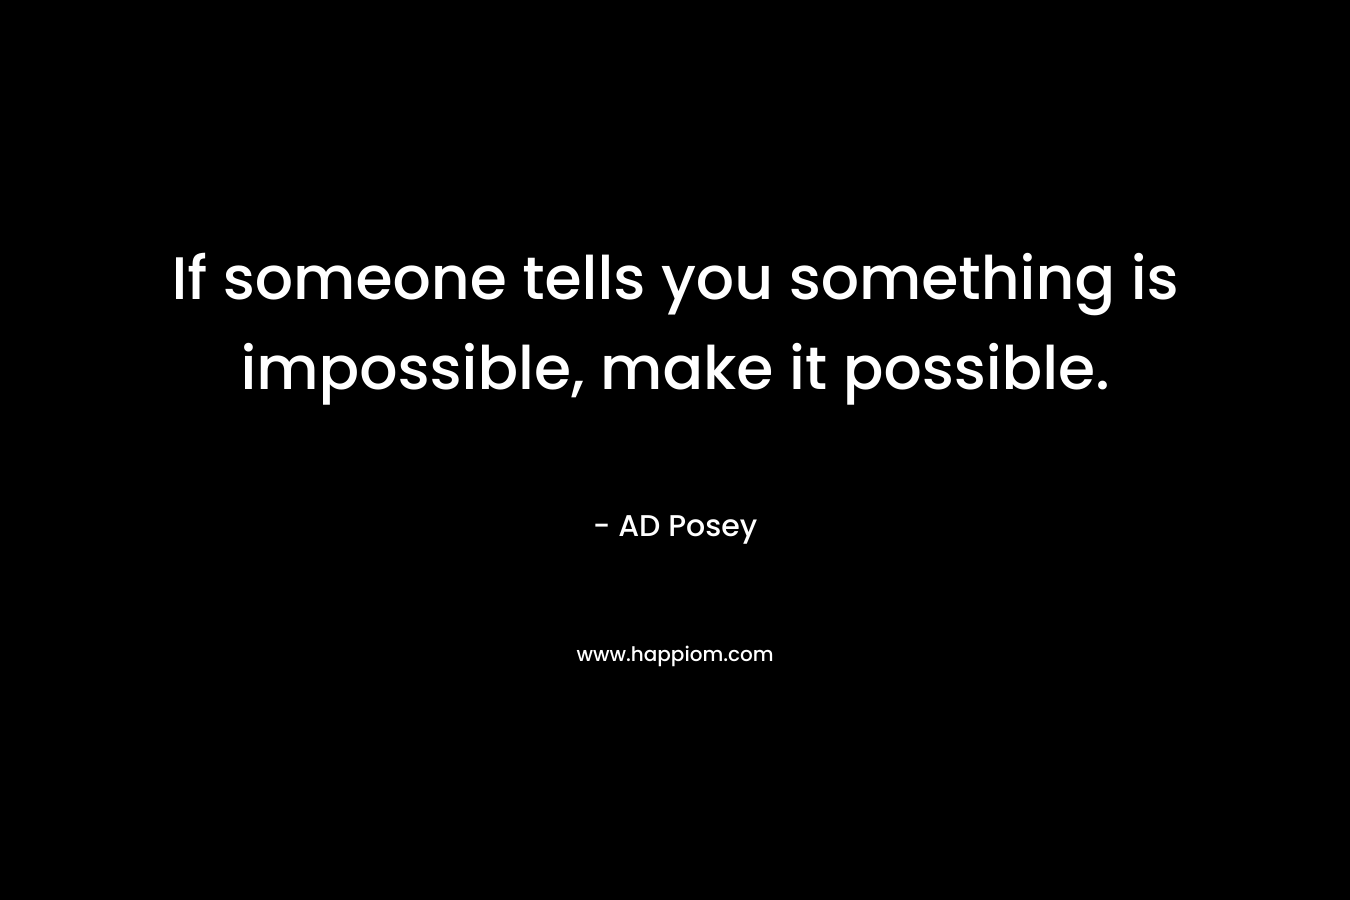 If someone tells you something is impossible, make it possible.